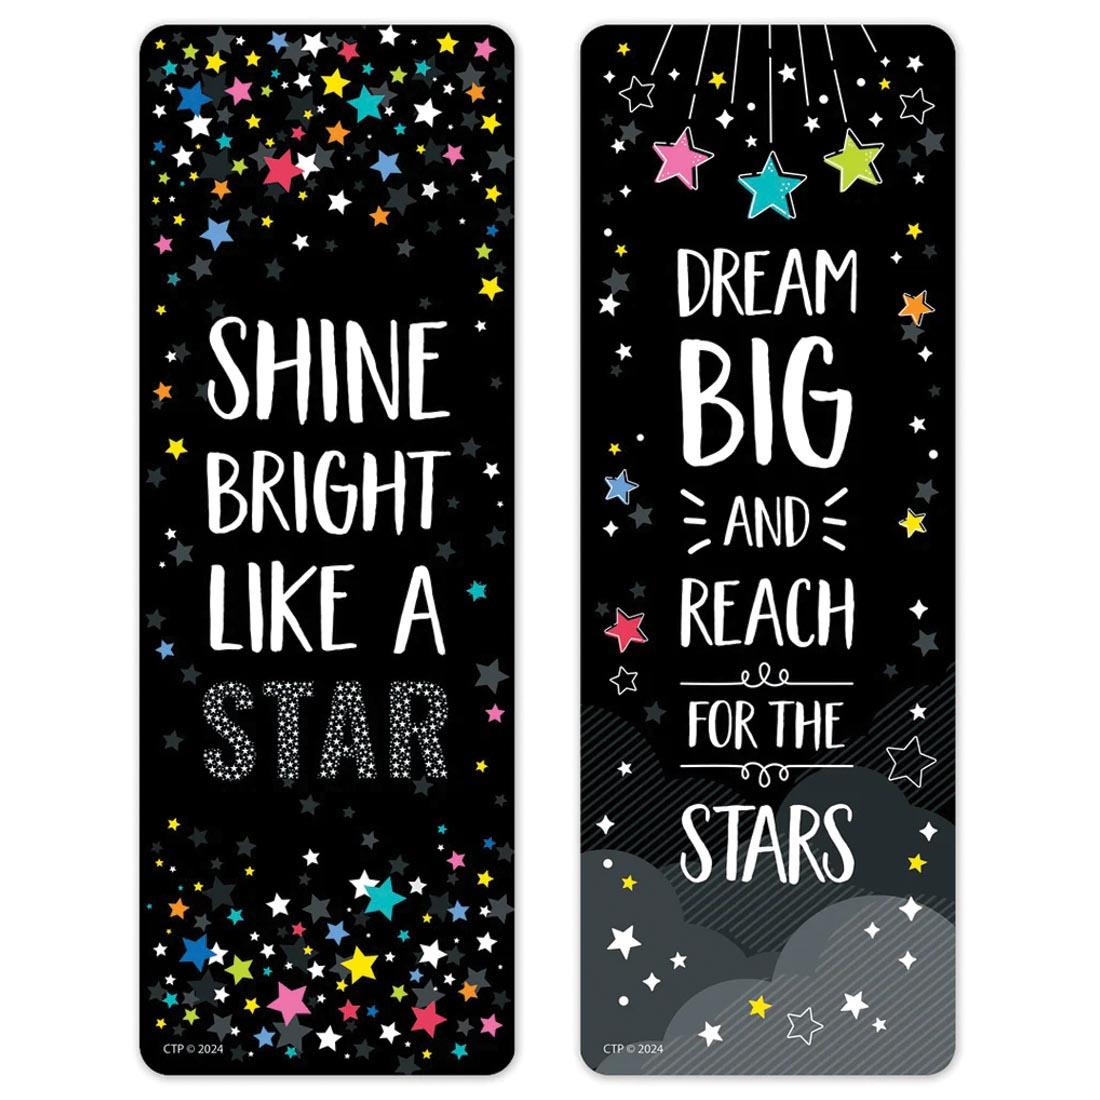 Two Positive Mindset Bookmarks from the Star Bright collection by Creative Teaching Press